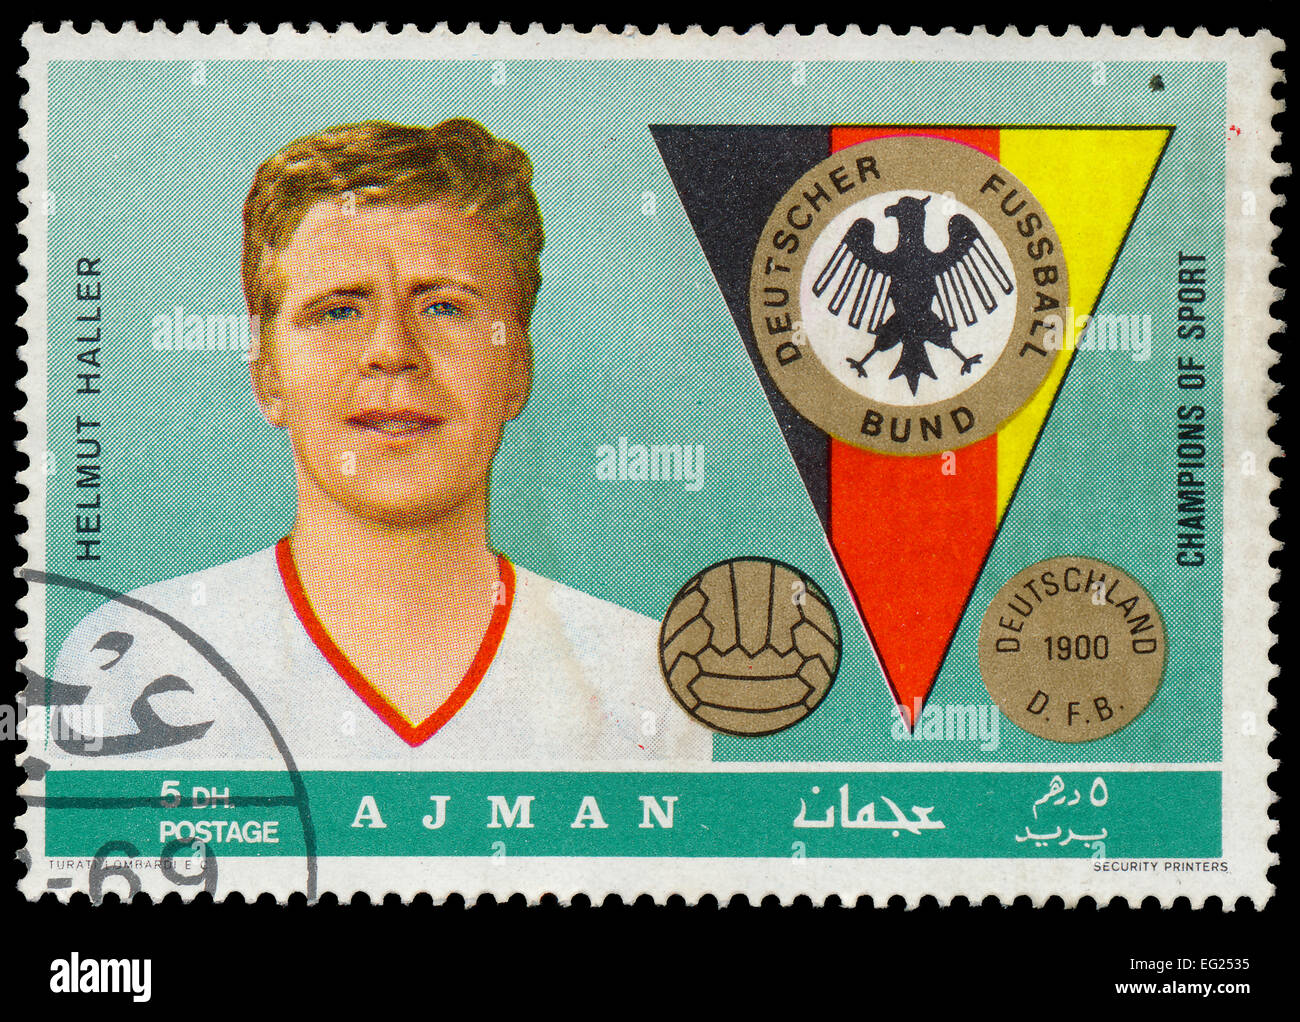 AJMAN - CIRCA 1969: a postage stamp printed in Ajman one of the emirares of the United Arab Emirates showing an image of Helmut  Stock Photo